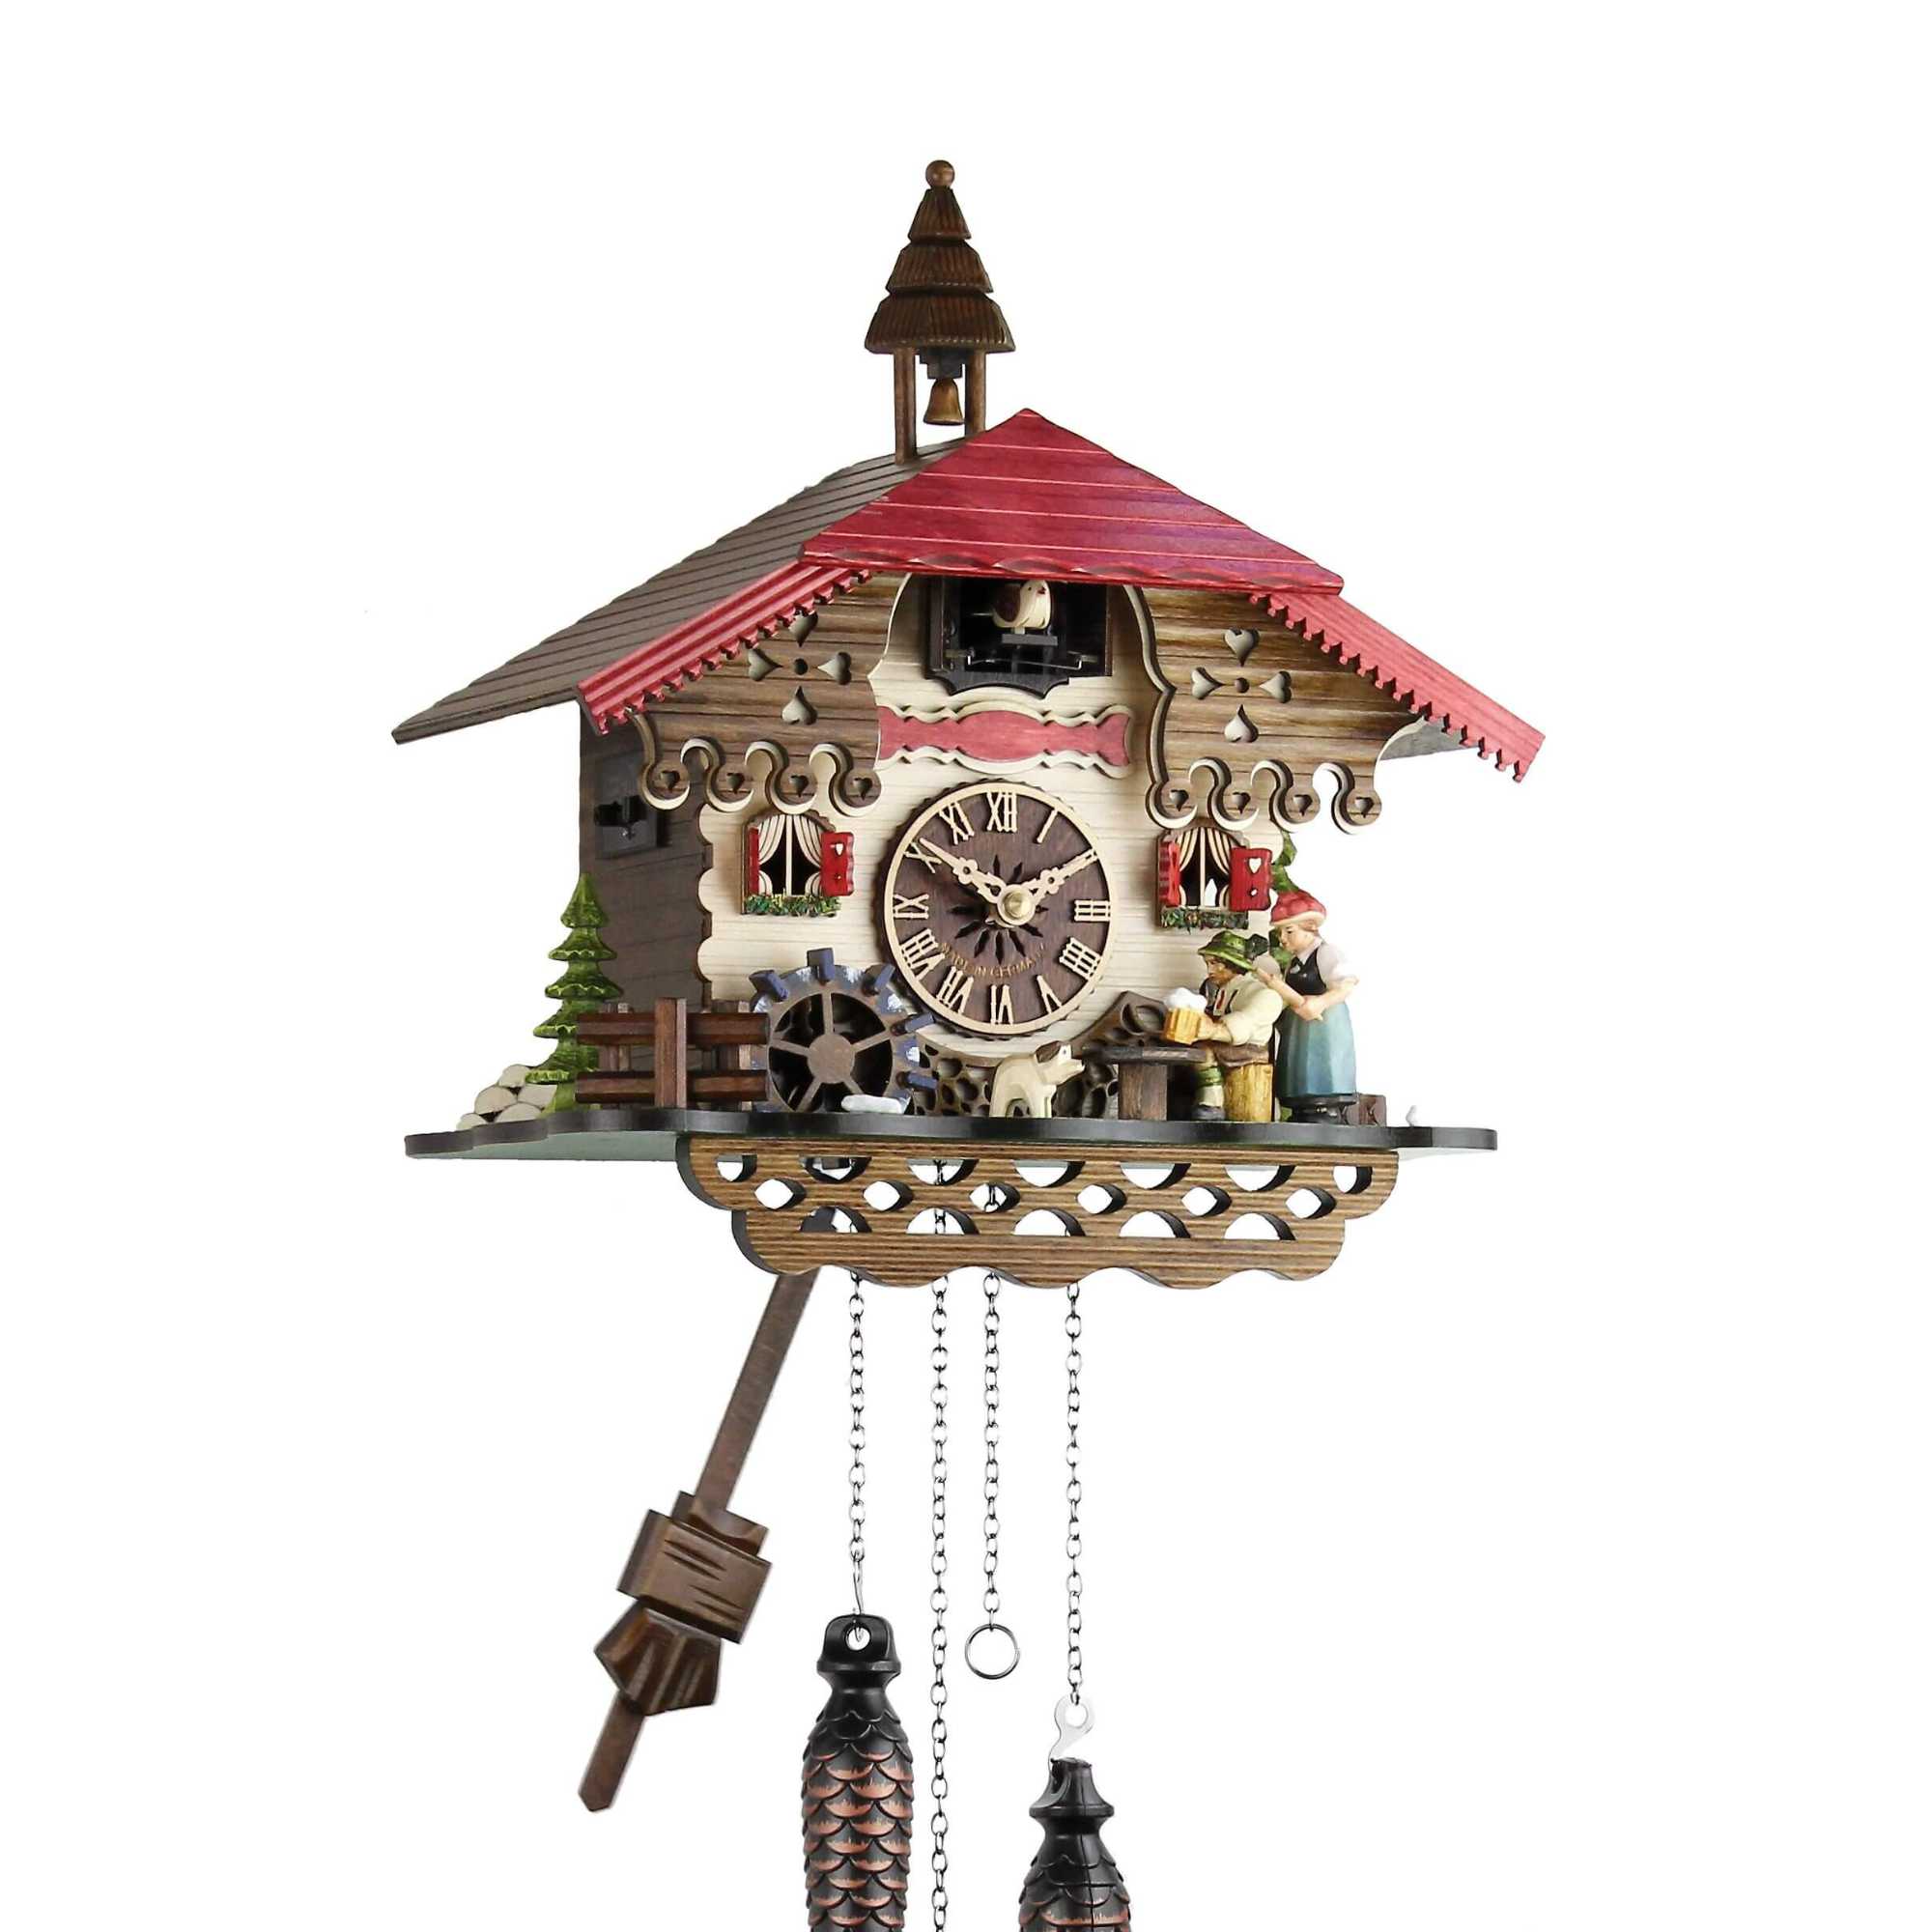 Engstler Quartz Cuckoo Clock Black Forest House with Music, Rotating Mill Wheel, The Beer Drinker and the Woman Lift the Arm